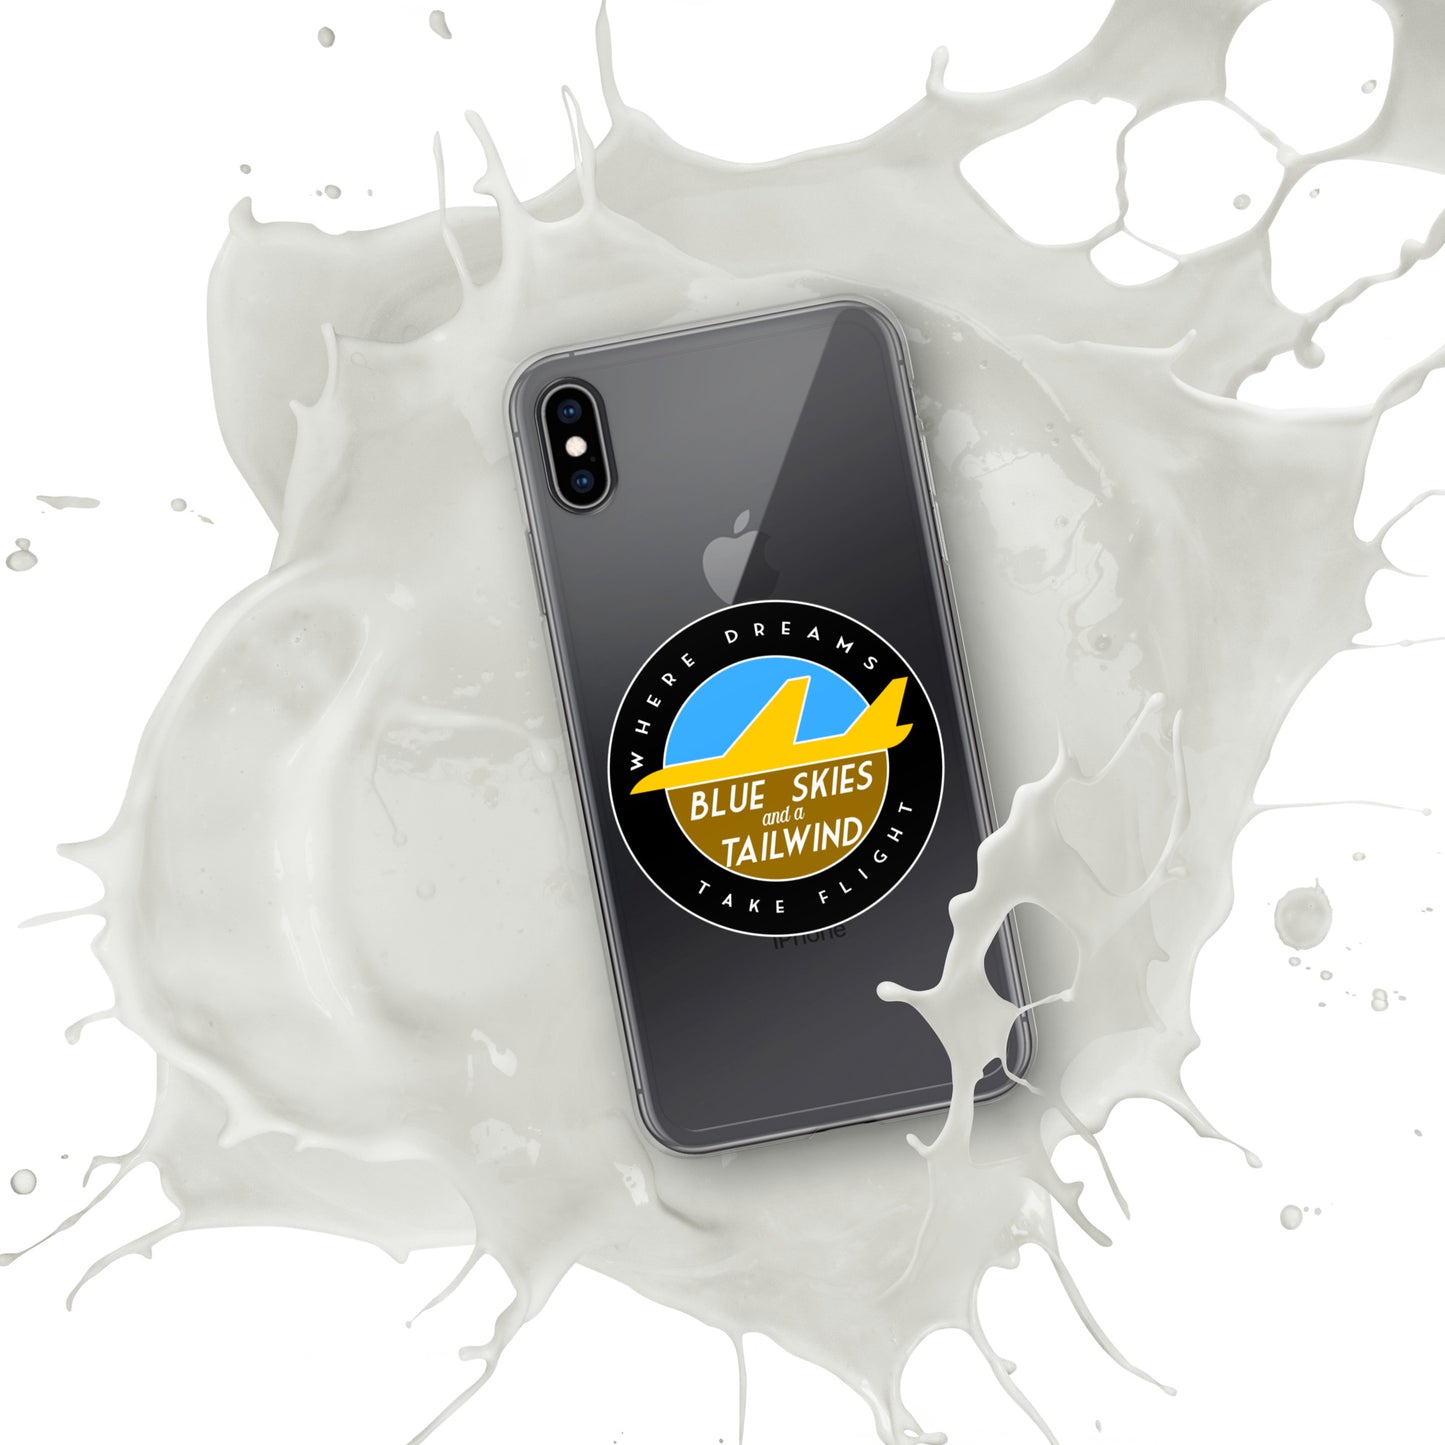 Blue Skies and a Tailwind iPhone Case